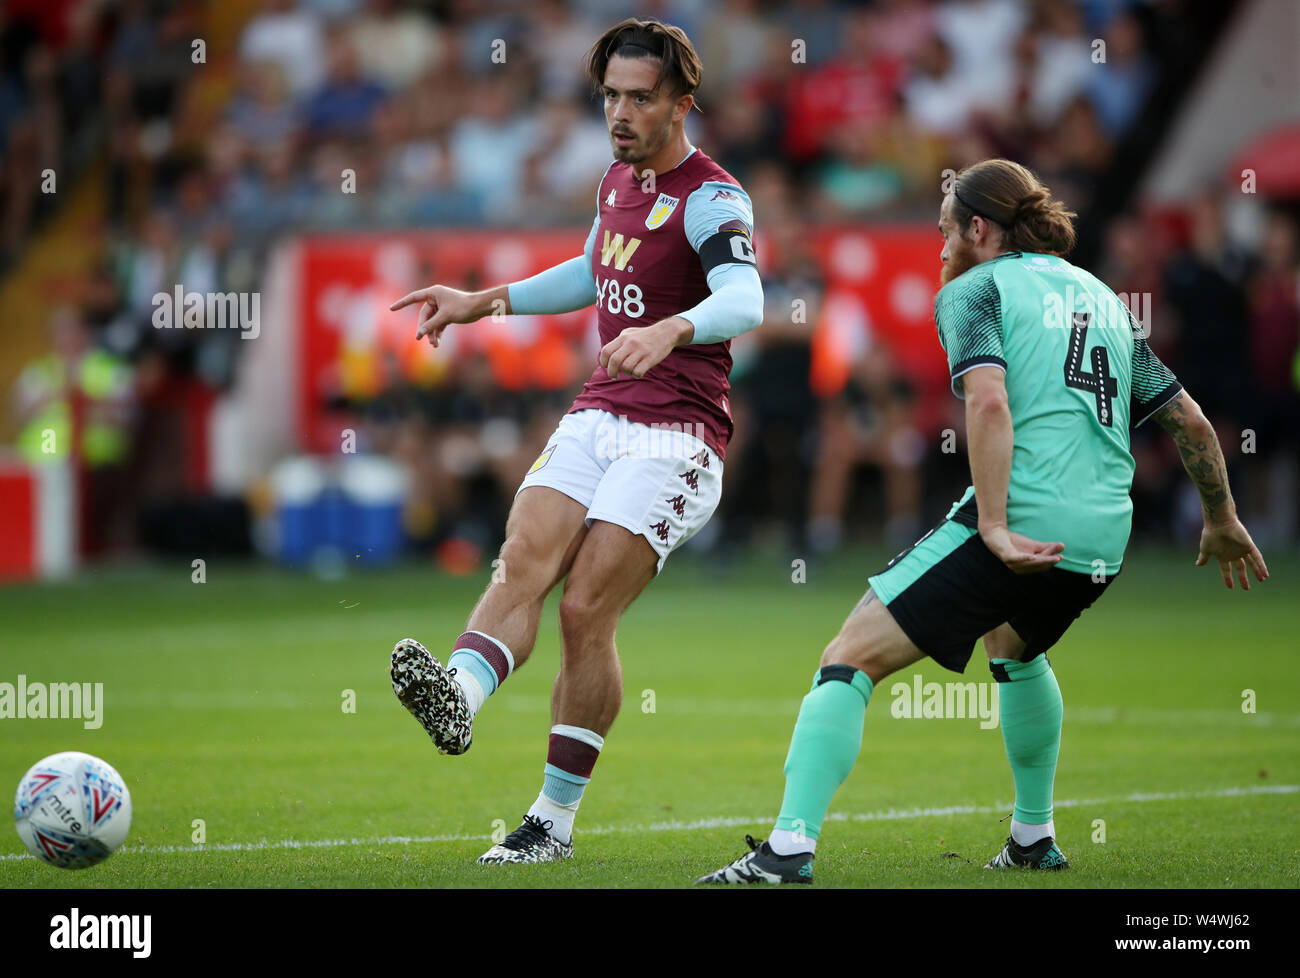 Aston Villa's Jack Grealish during the pre-season friendly match at the Banks's Stadium, Walsall. PRESS ASSOCIATION Photo. Picture date: Wednesday July 24, 2019. See PA story SOCCER Walsall. Photo credit should read: Nick Potts/PA Wire. RESTRICTIONS: No use with unauthorised audio, video, data, fixture lists, club/league logos or 'live' services. Online in-match use limited to 120 images, no video emulation. No use in betting, games or single club/league/player publications. Stock Photo